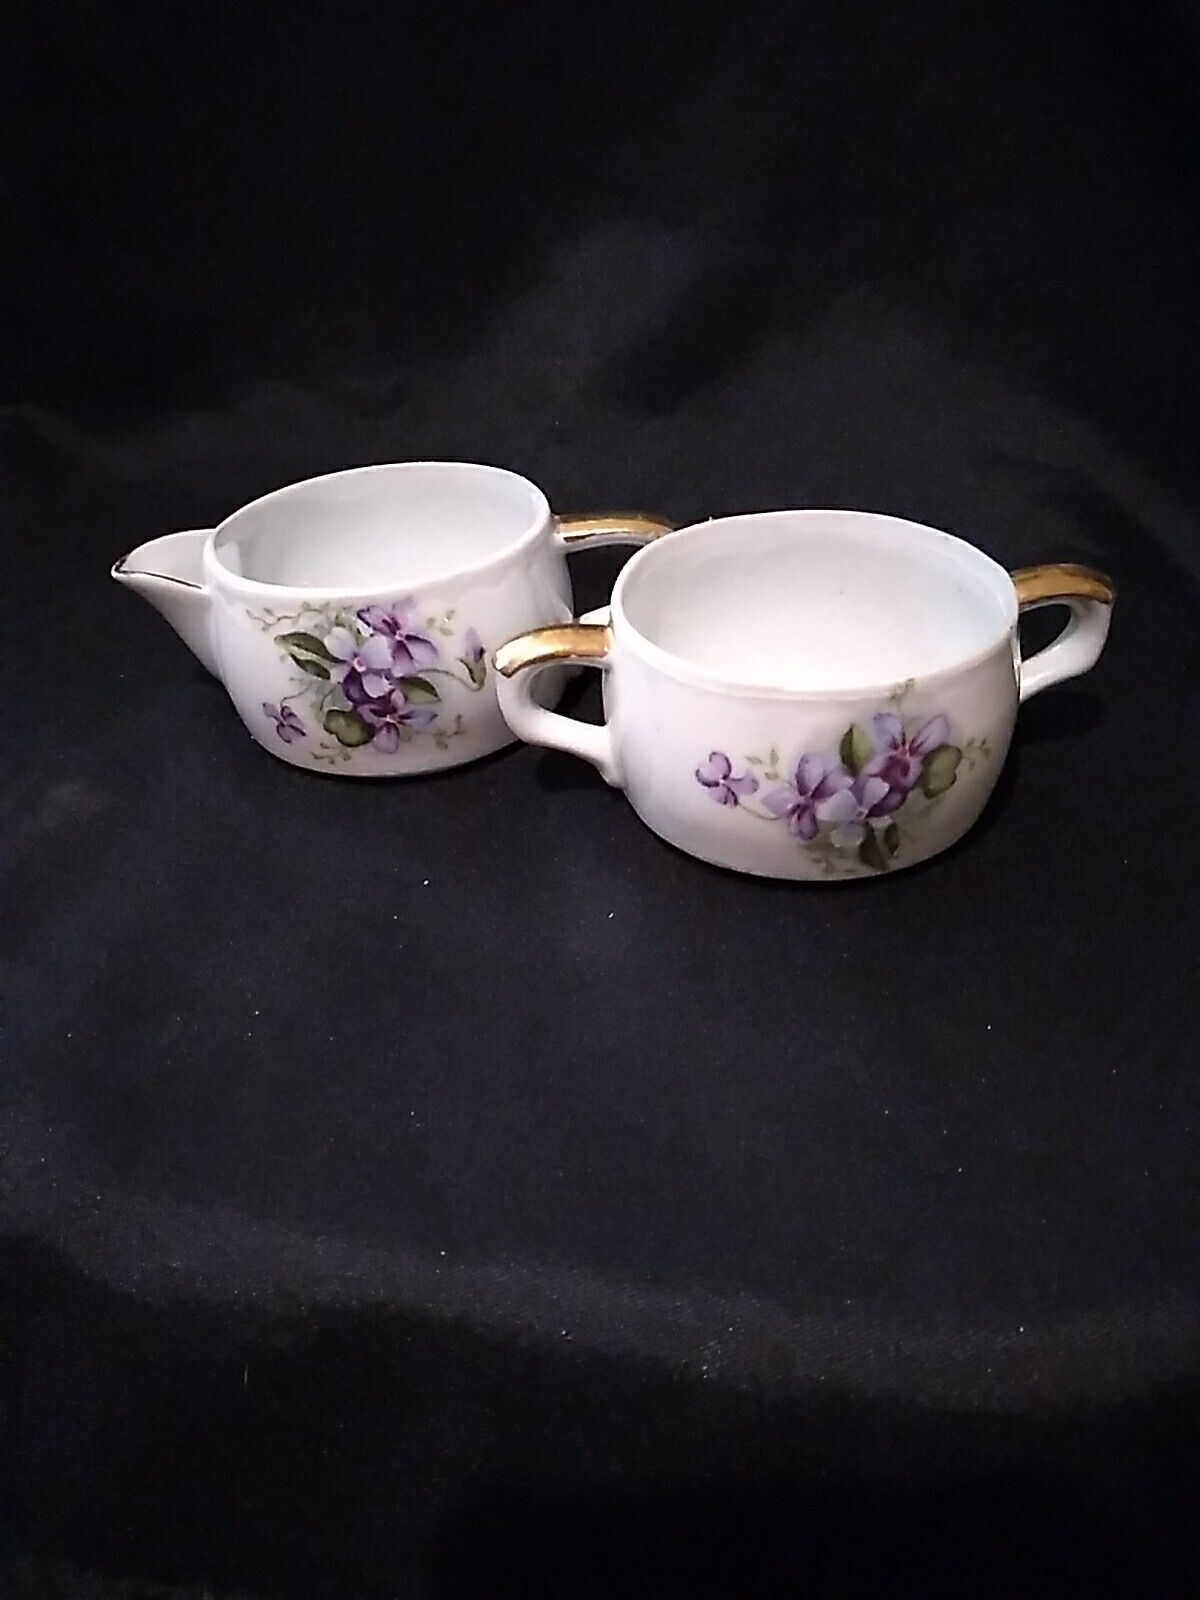 Creamer And Sugar With Violets